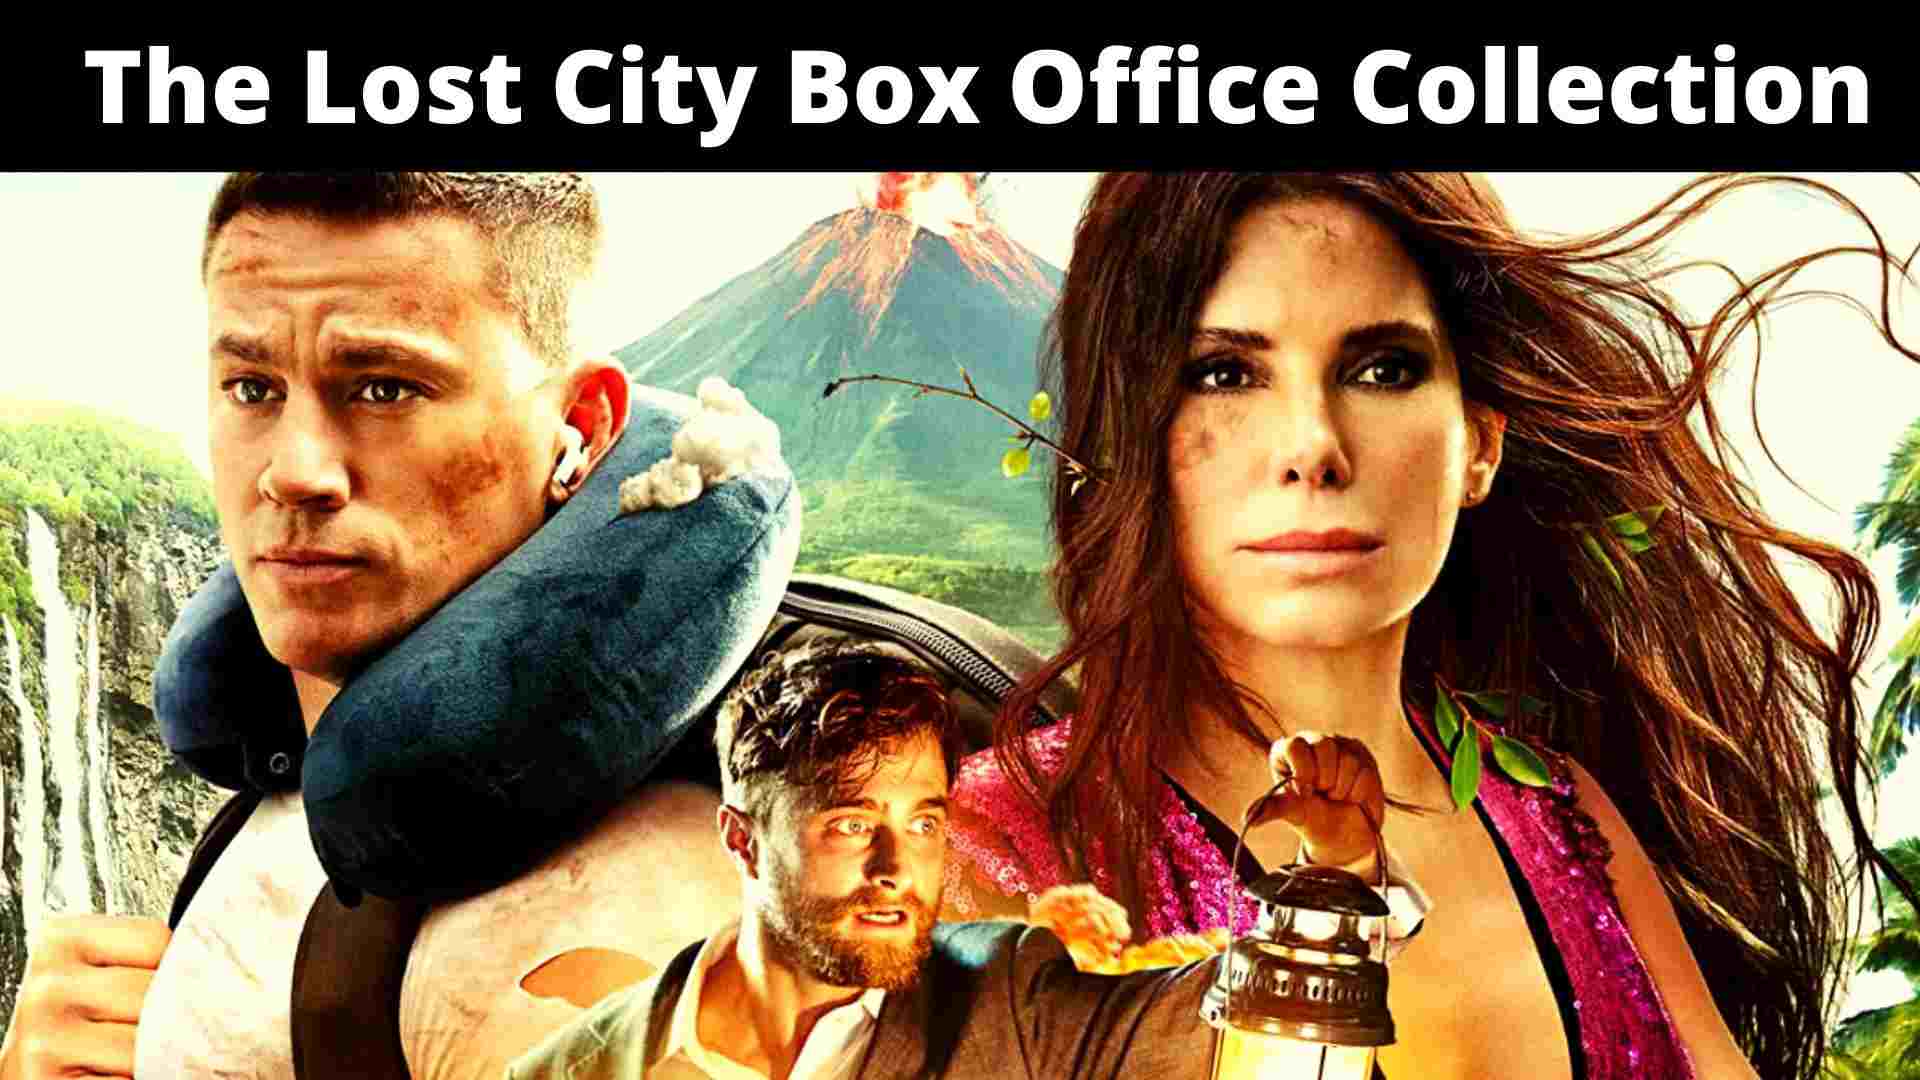 The Lost City Box Office Collection wallpaper and images